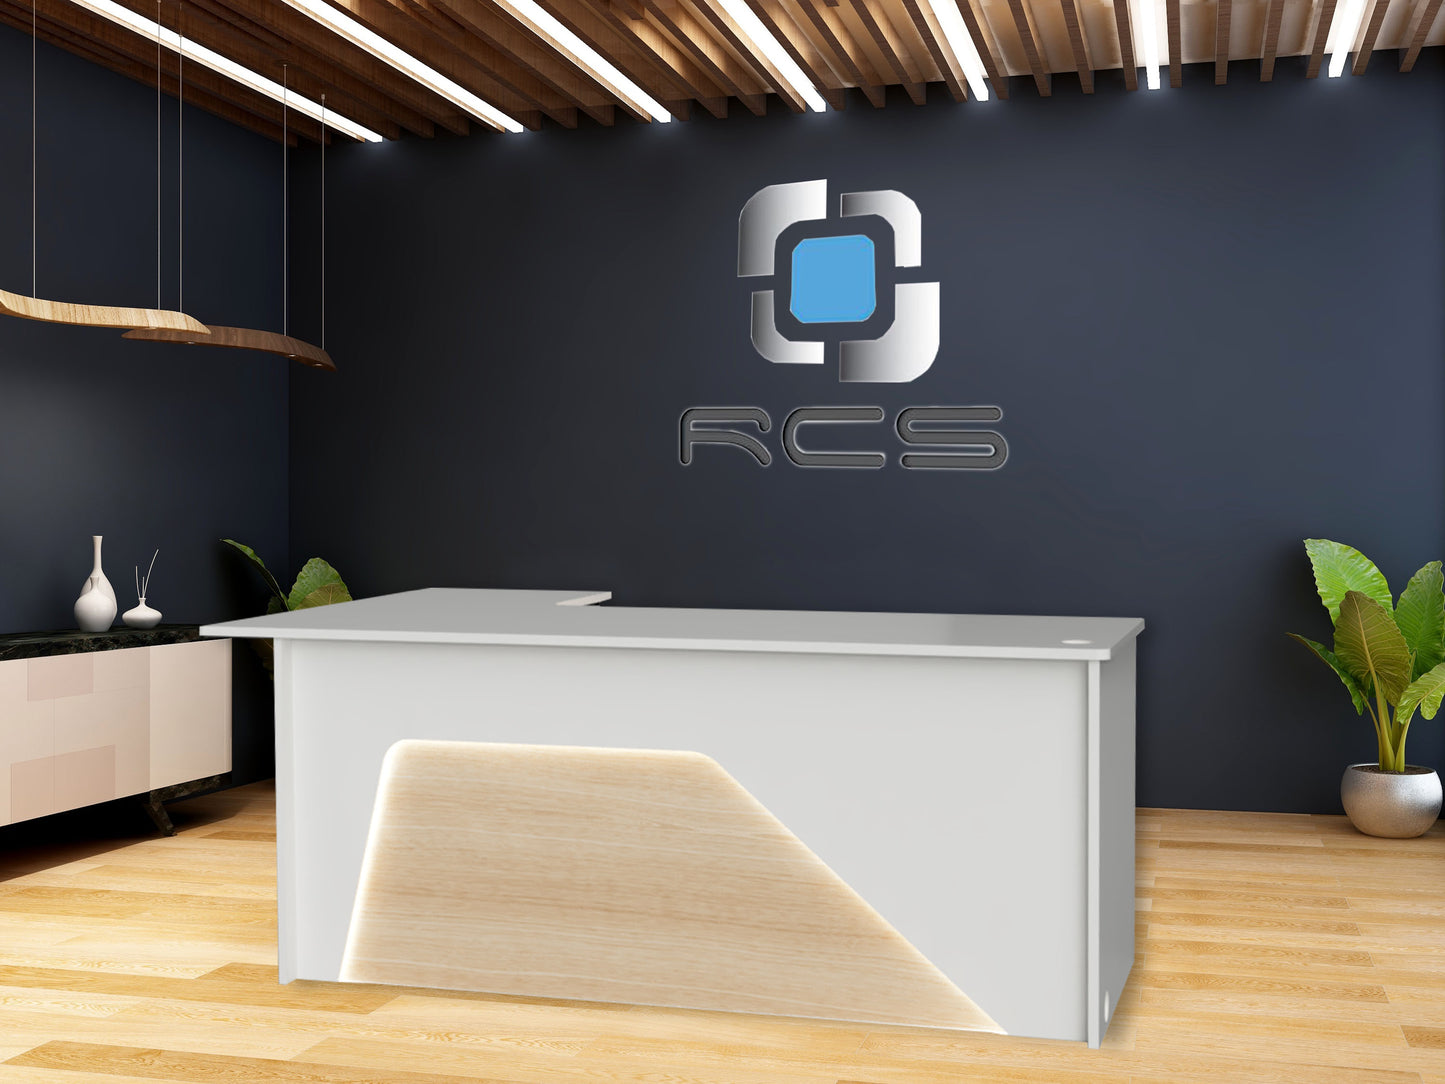 An elegant and streamlined modern office desk with a sleek design. The desk features a minimalist aesthetic with clean lines, a smooth surface, and a contemporary color scheme. It includes ample workspace, integrated storage compartments, and stylish metal or wooden legs. Perfect for a productive and modern work environment